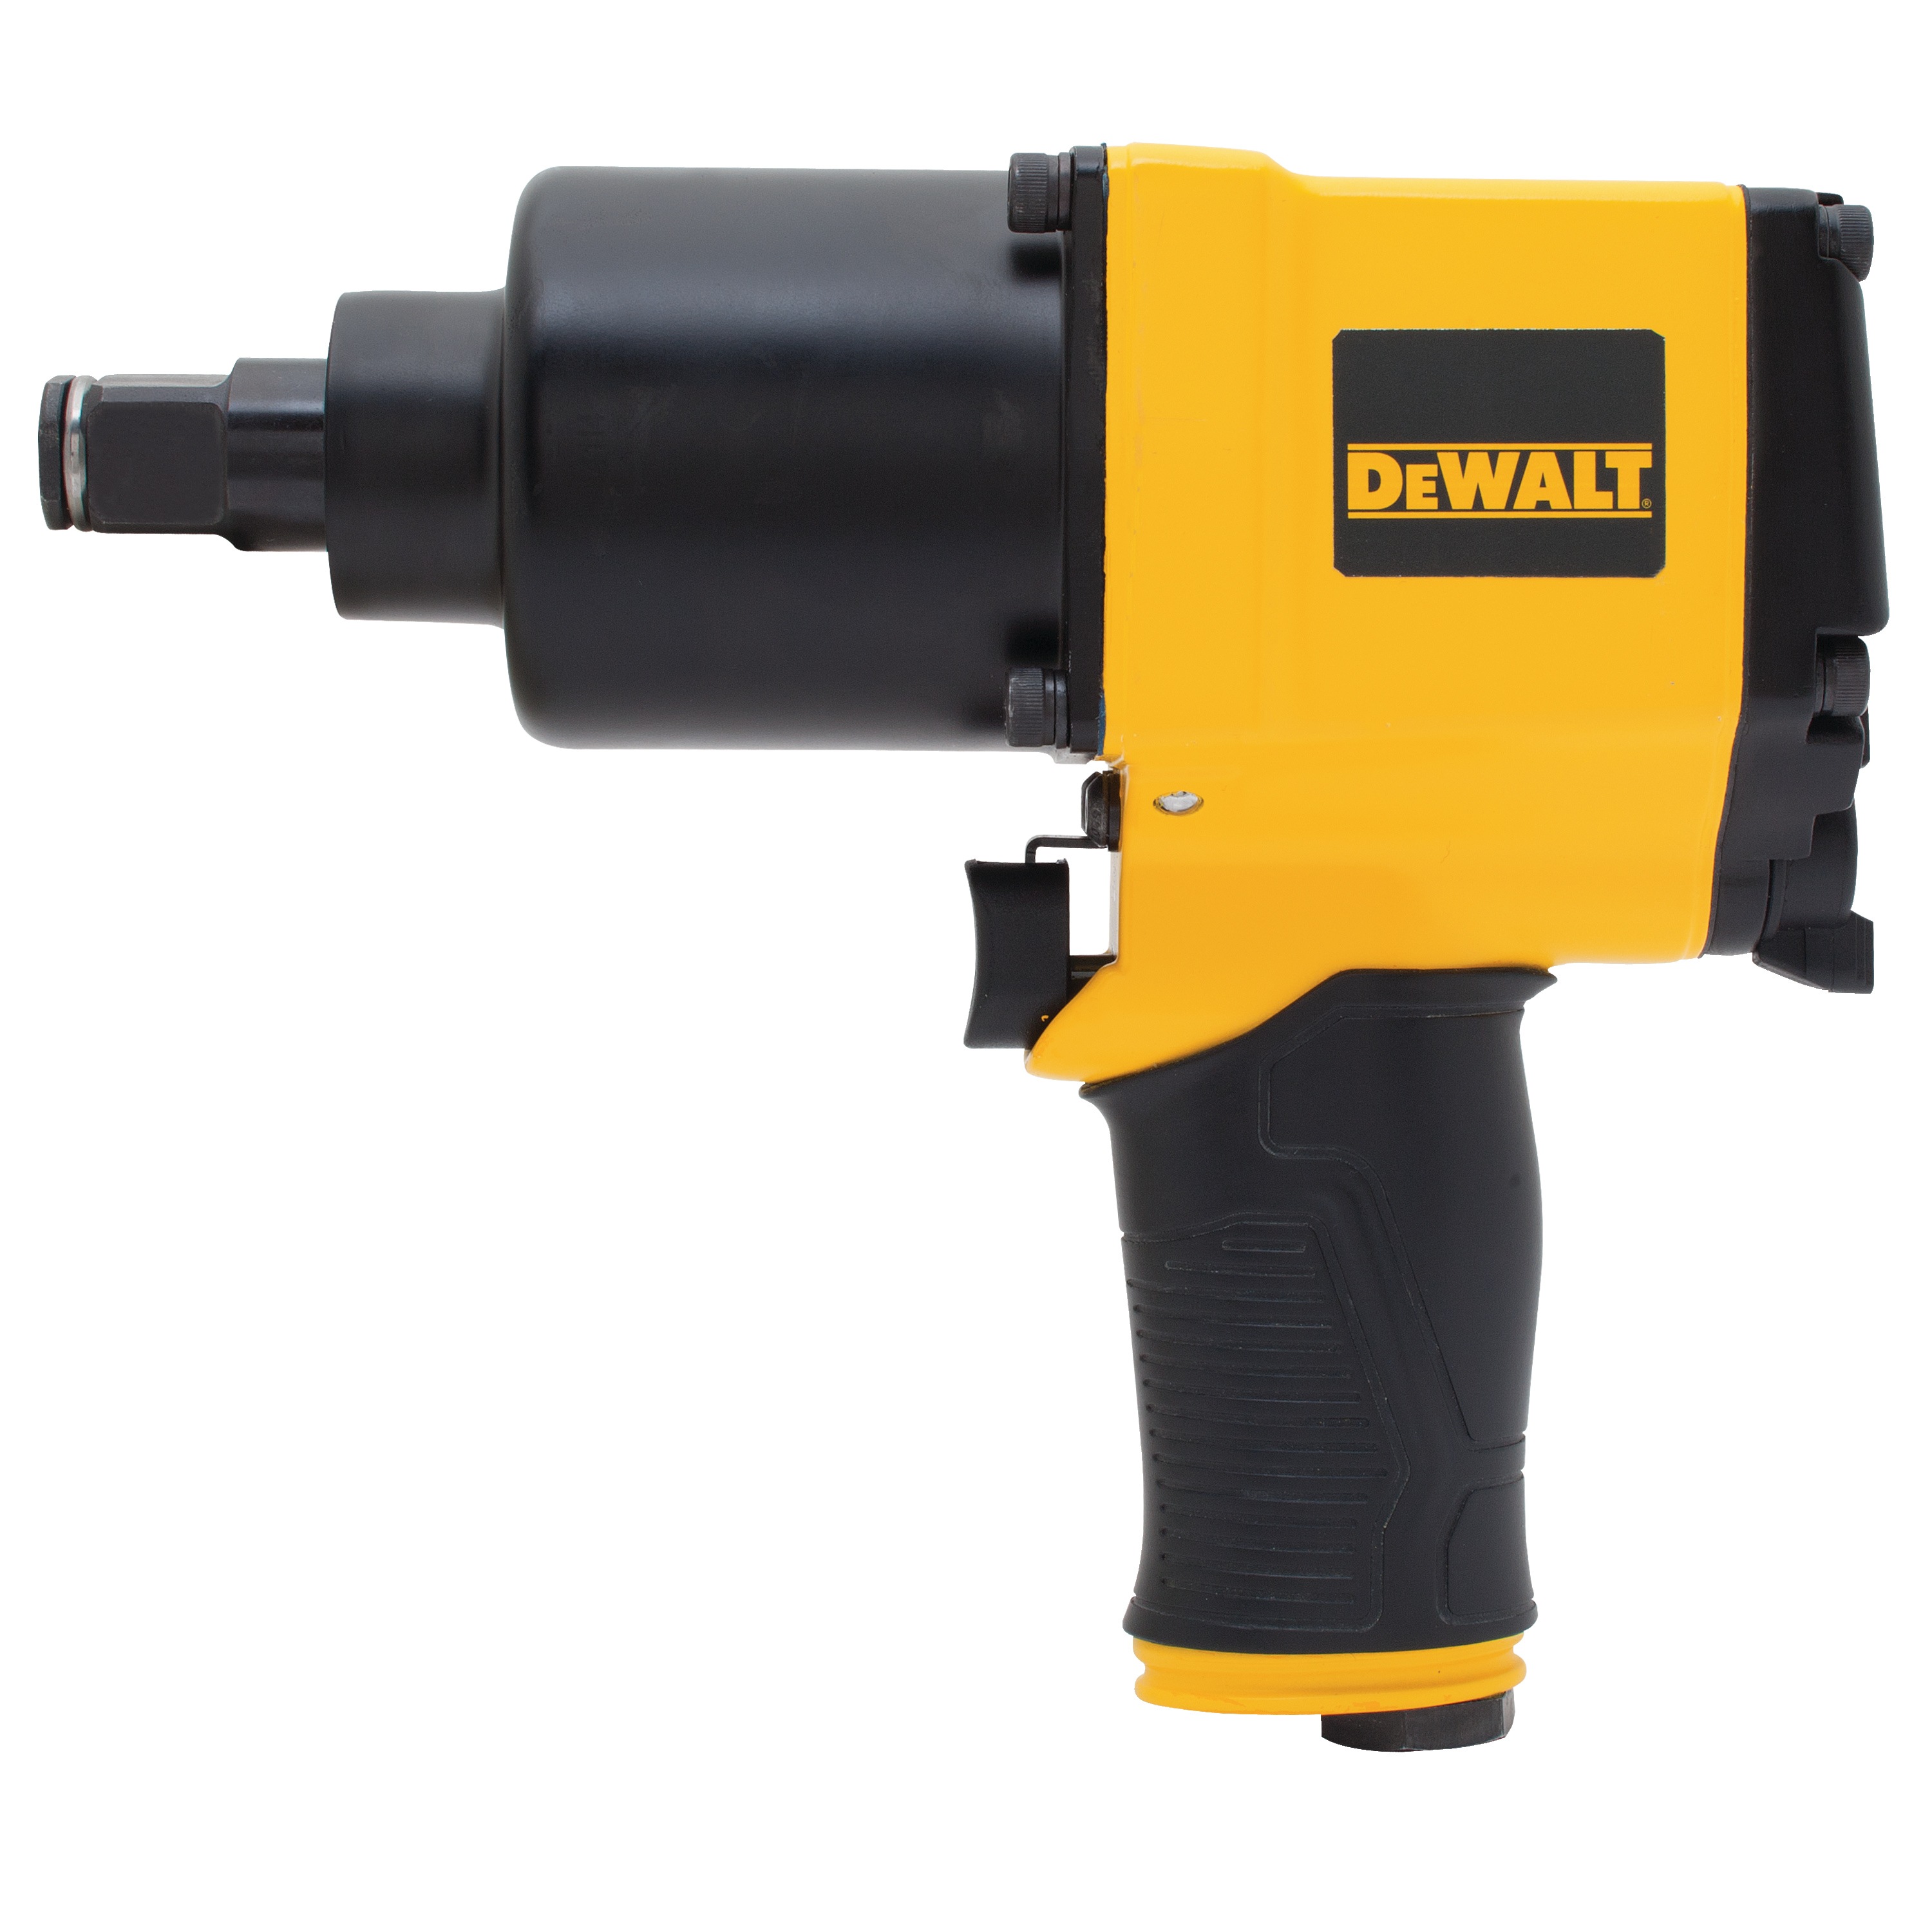 Side view of DEWALT drive impact wrench.